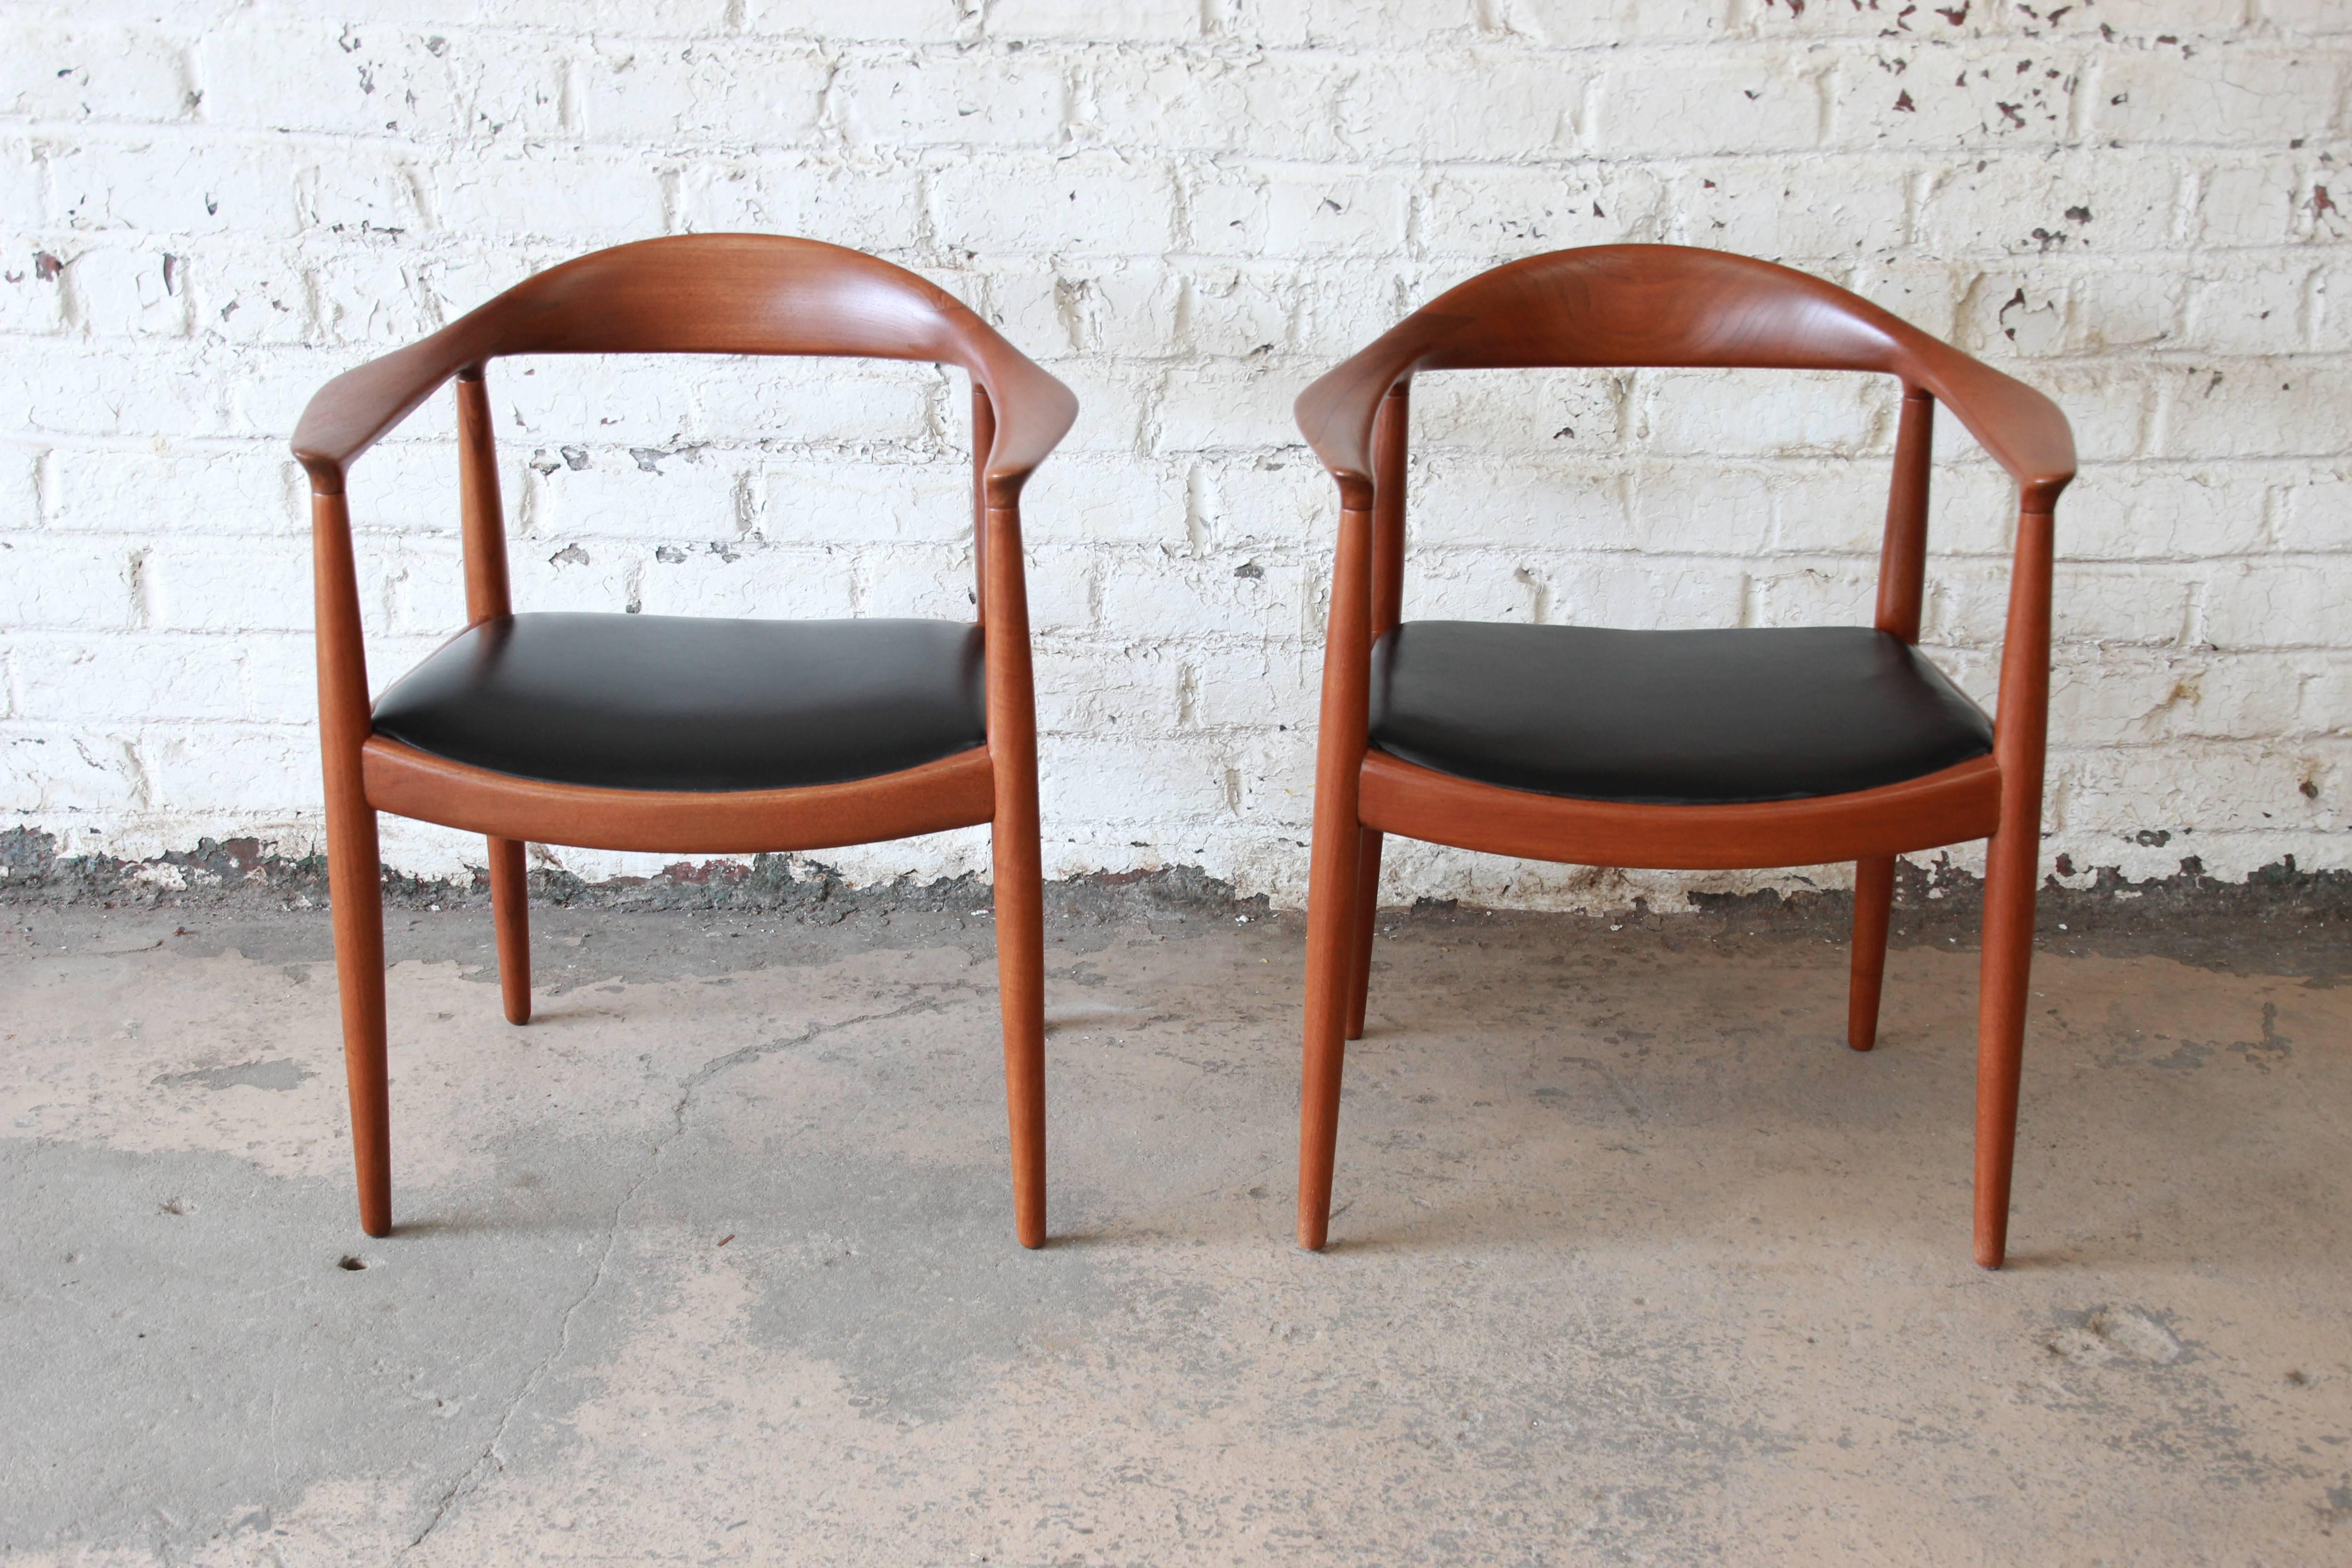 A rare and exceptional pair of JH 503 armchairs designed in 1949 by Hans J. Wegner and produced in Denmark by Johannes Hansen. Most commonly known as 